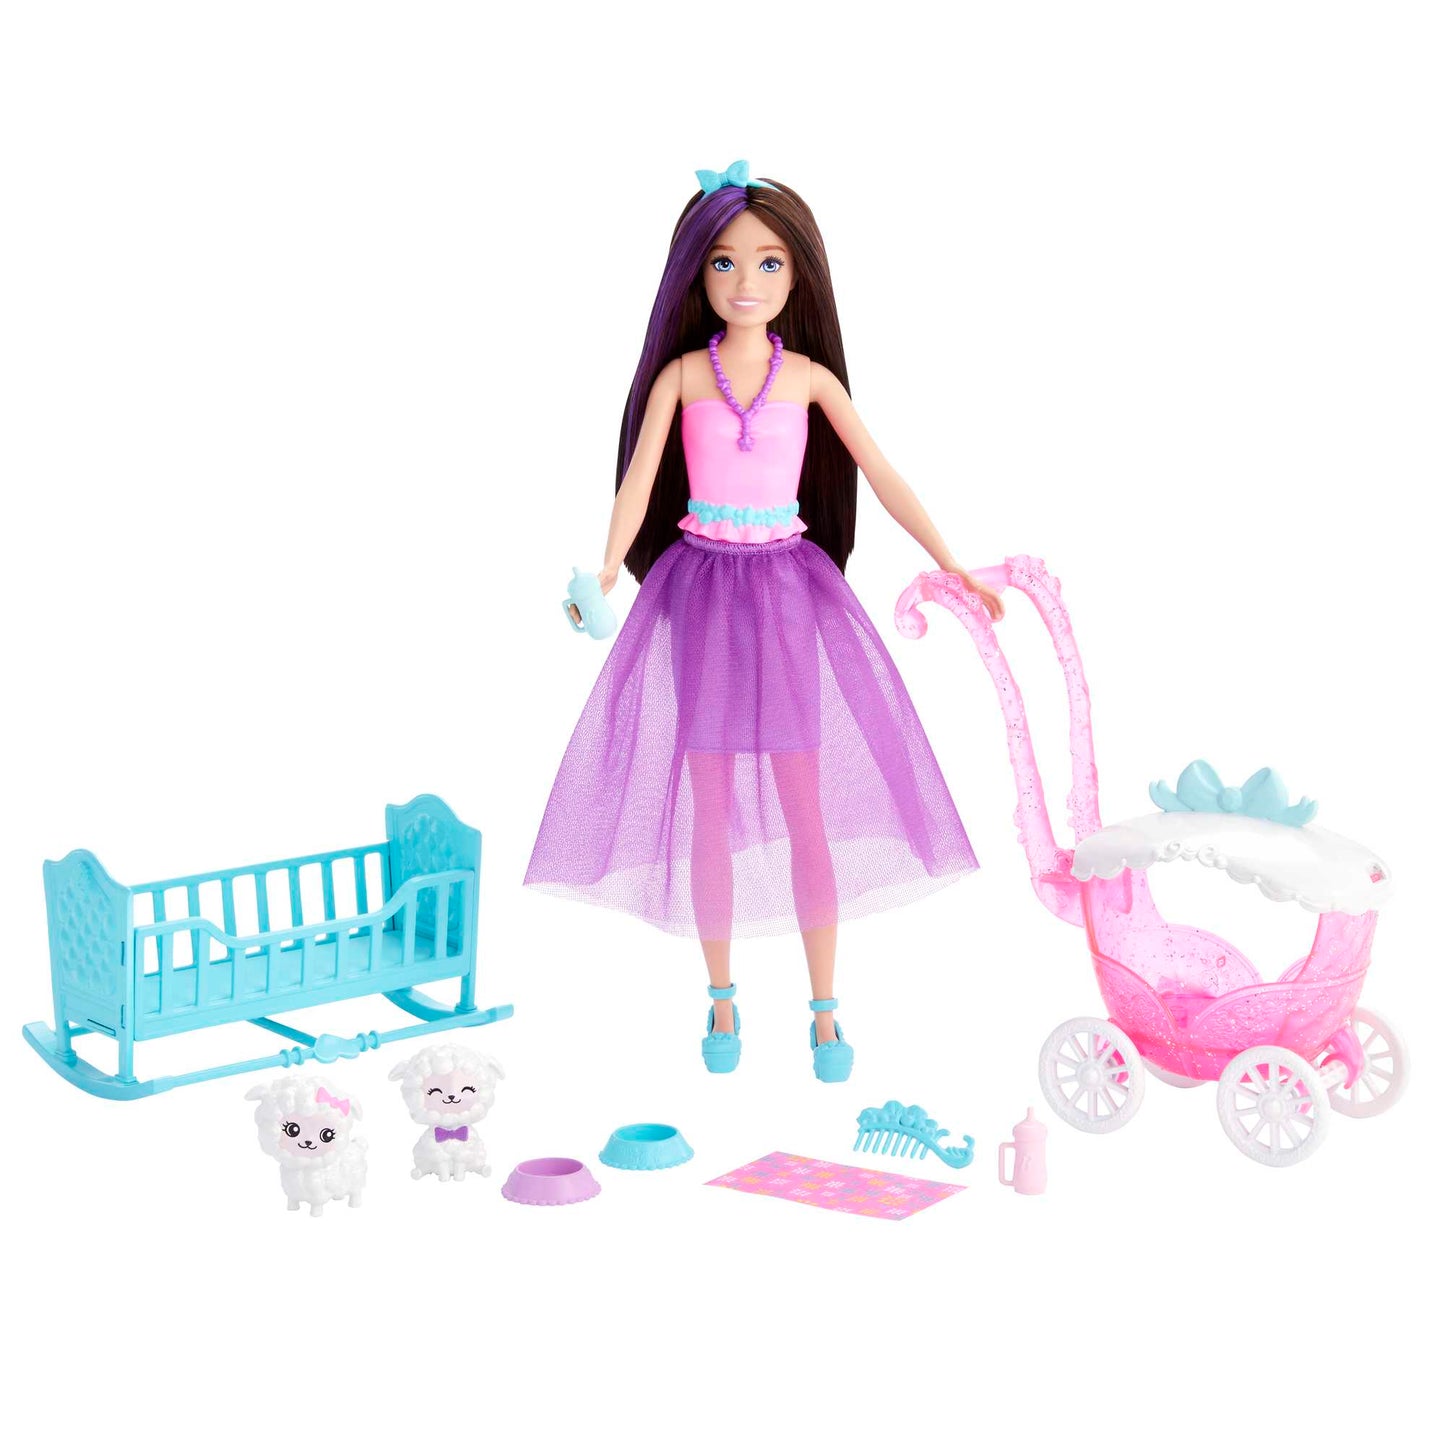 Barbie - Skipper Doll And Nurturing Playset With Lambs And Stroller